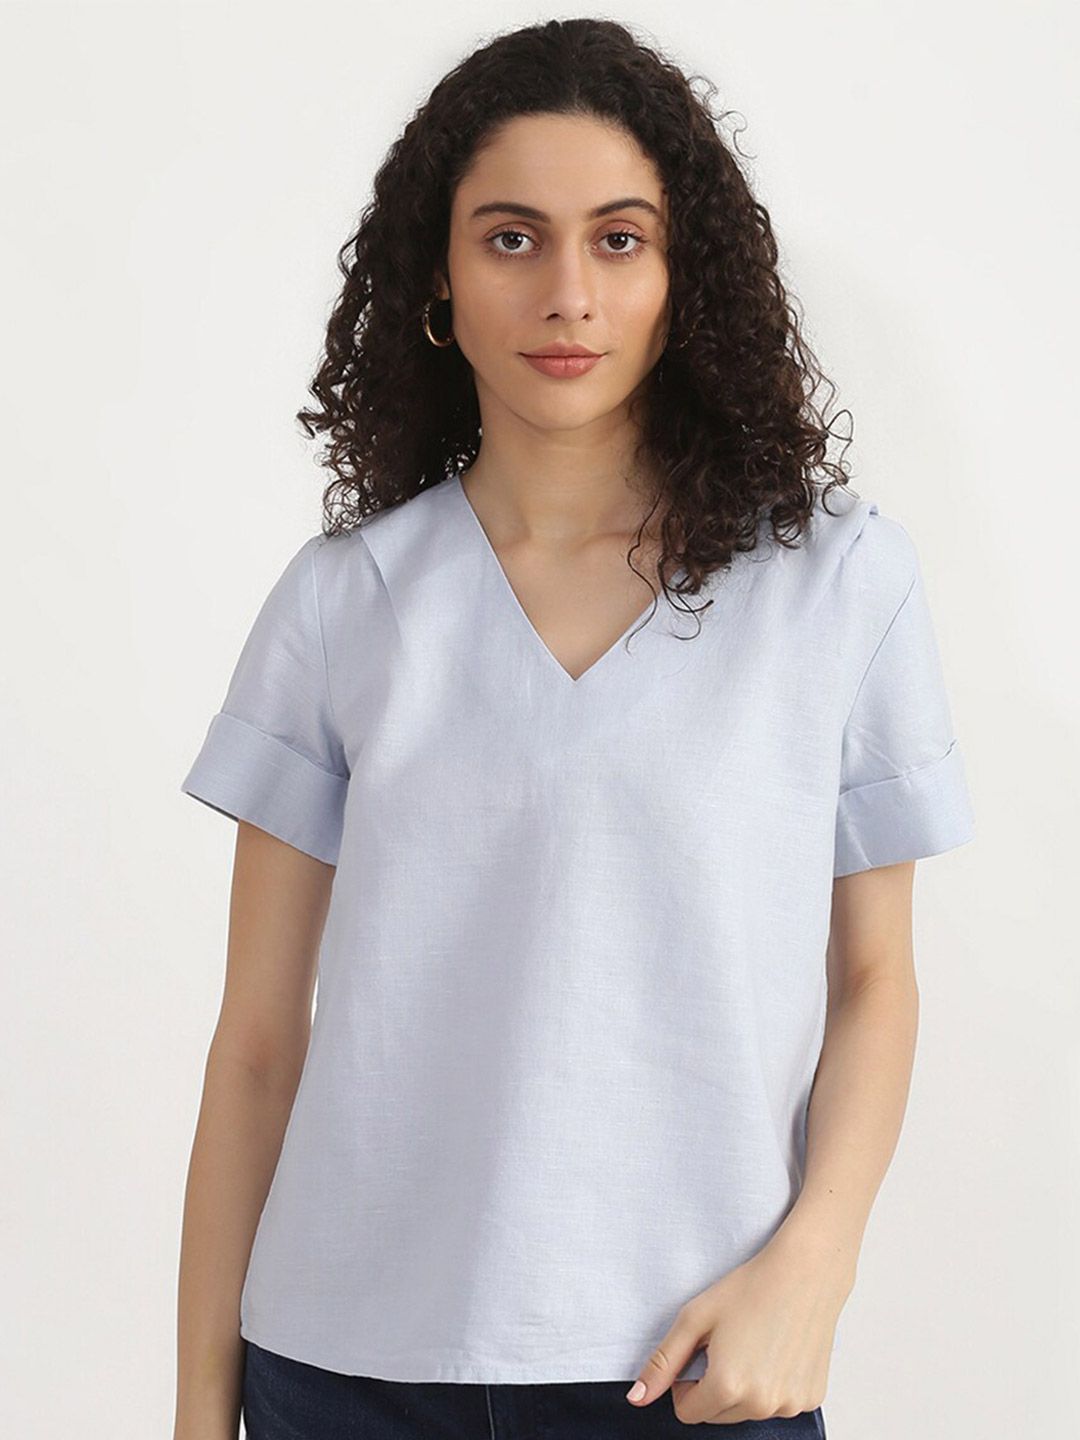 United Colors of Benetton Blue Solid Top Price in India